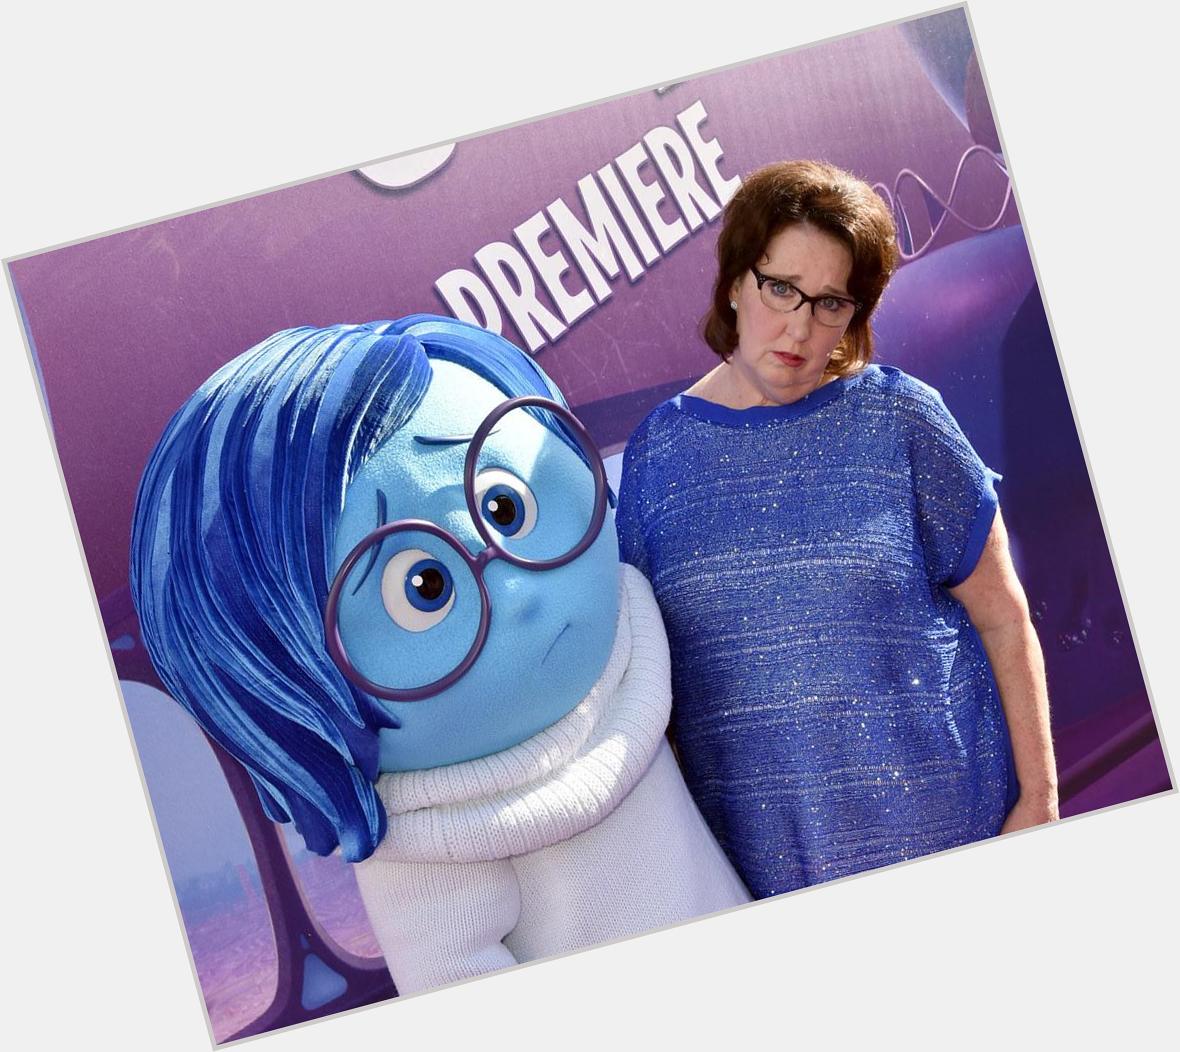 Happy birthday, Phyllis Smith! Hopefully, it\s filled with mostly joy and only a little sadness 